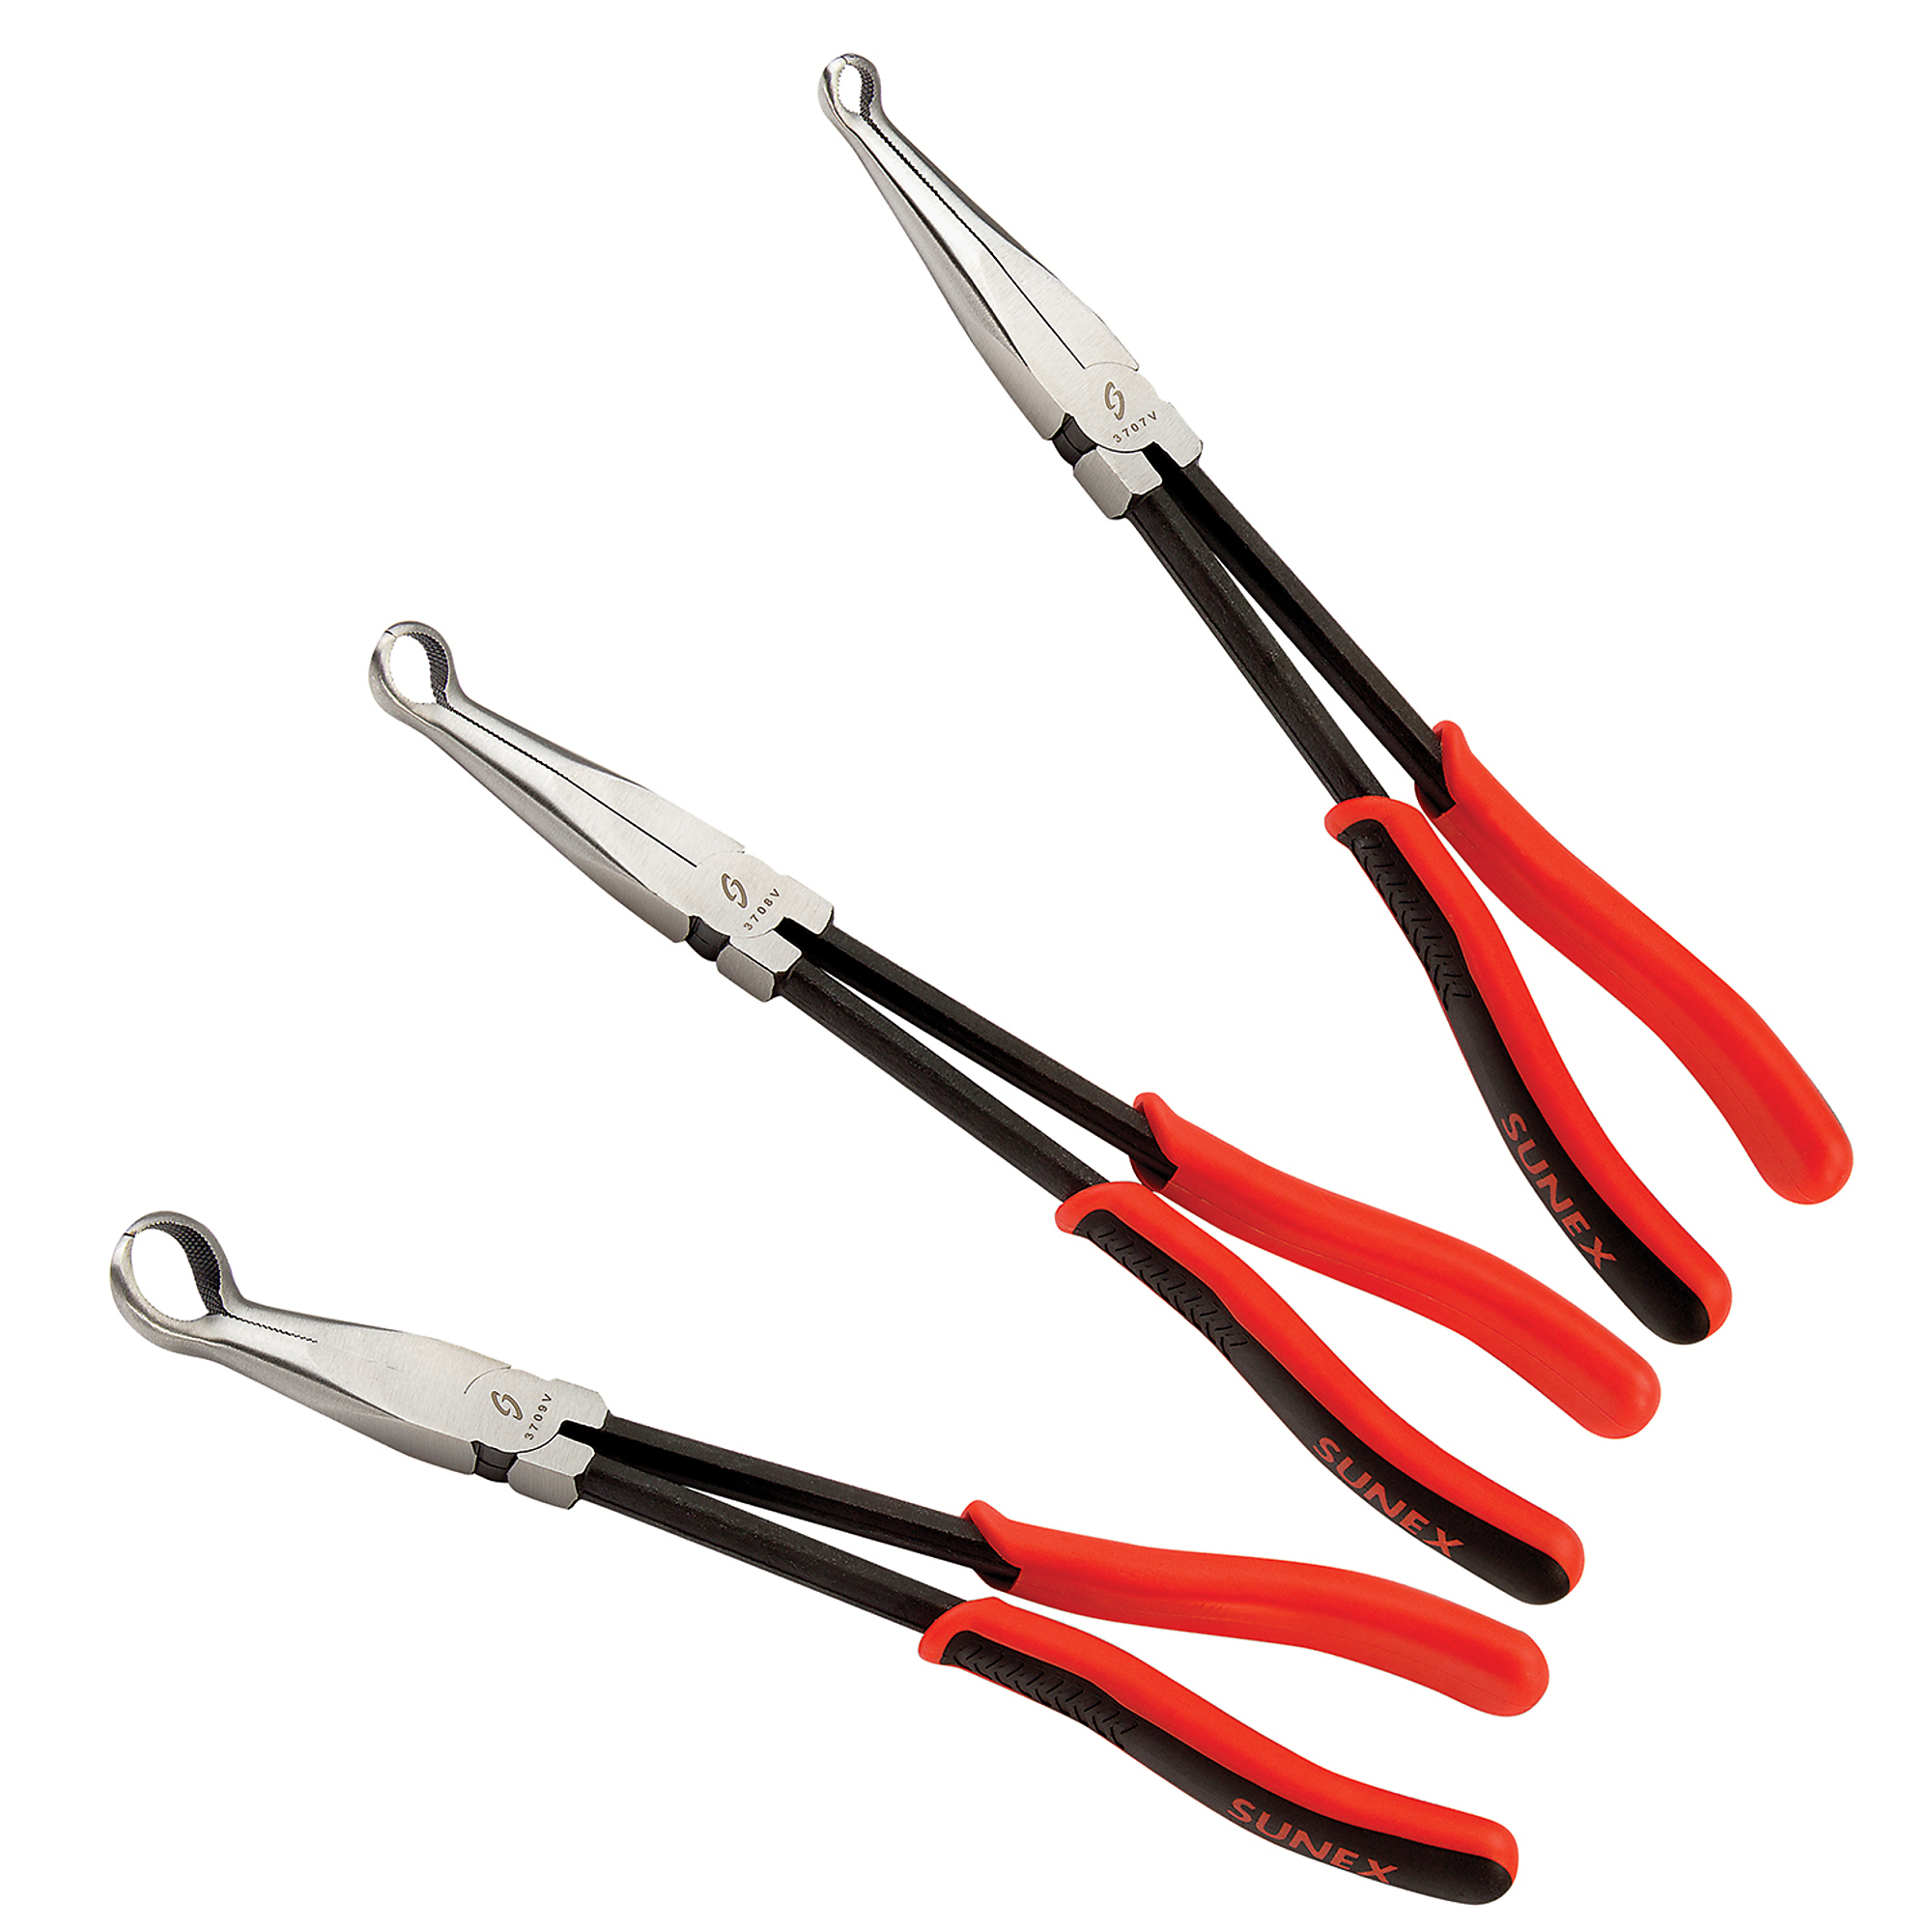 Sunex Tools, 11Inch, Hose Gripper Plier Set, 3-Piece, Pieces (qty.) 1, Material Alloy Steel, Jaw Capacity 1 in, Model 3703V